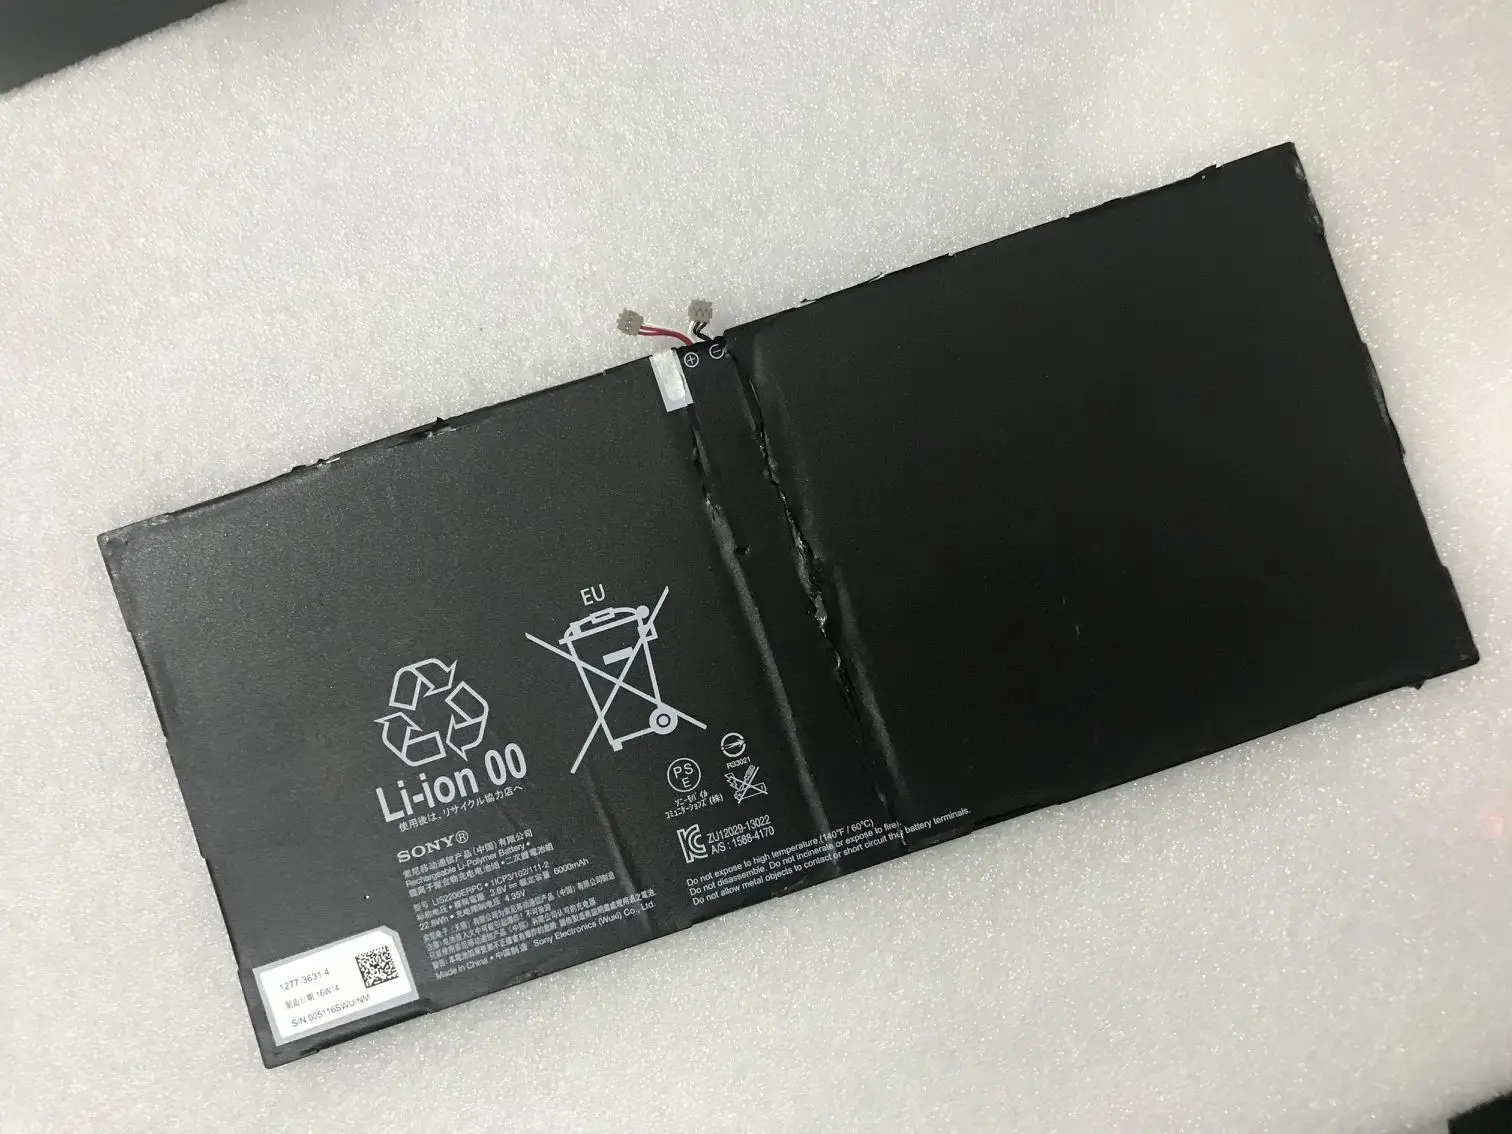 

original Tablet Battery For SONY Xperia Tablet Z2 SGP541CN SGP511 SGP512 SGP521 SGP541 SGP551 Tablet LIS2206ERPC 6000mAh Used